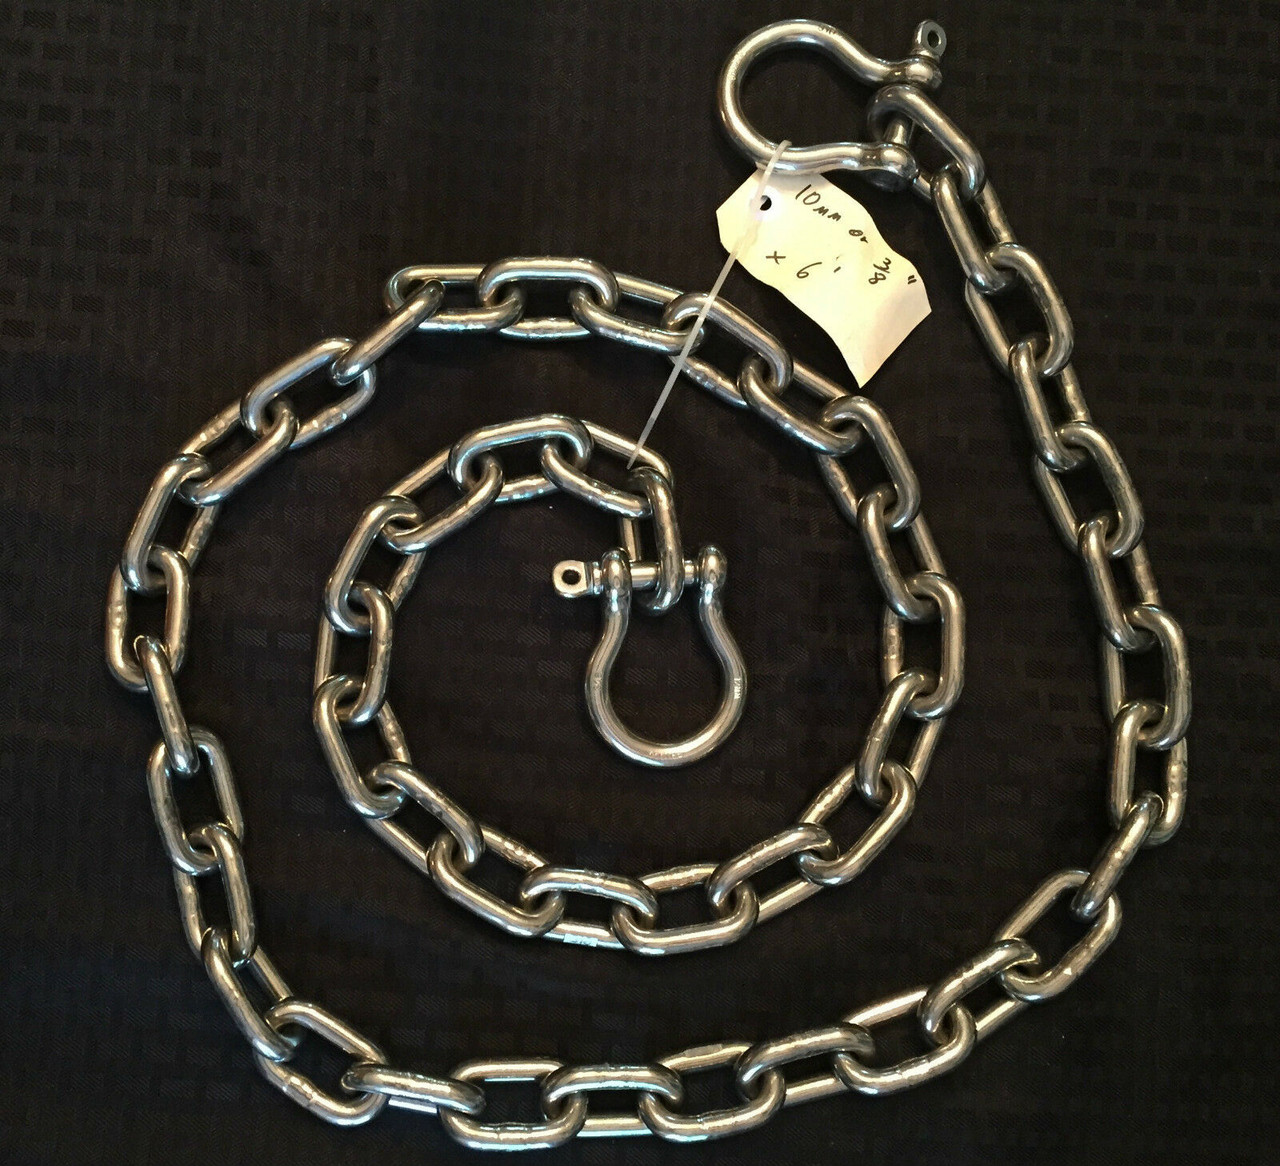 Stainless Steel 316 Anchor Chain 3/8 or 10mm by 15' Long Shackles